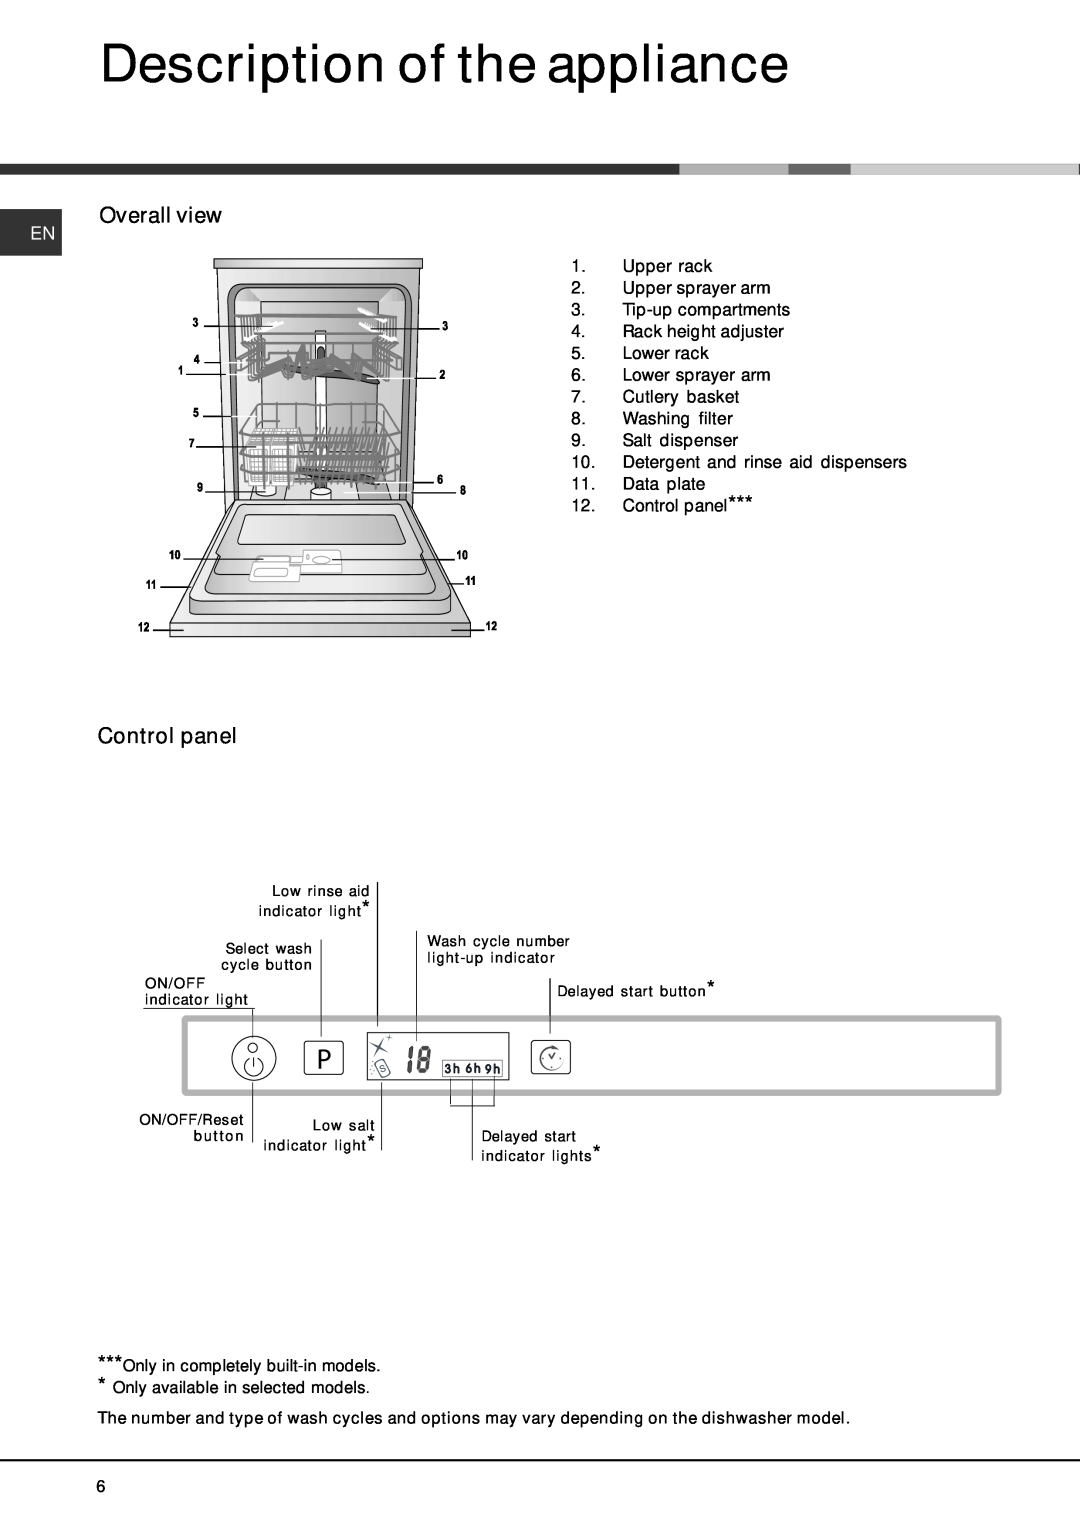 Hotpoint LFT 2284, Dishwasher manual Description of the appliance, Overall view, Control panel 